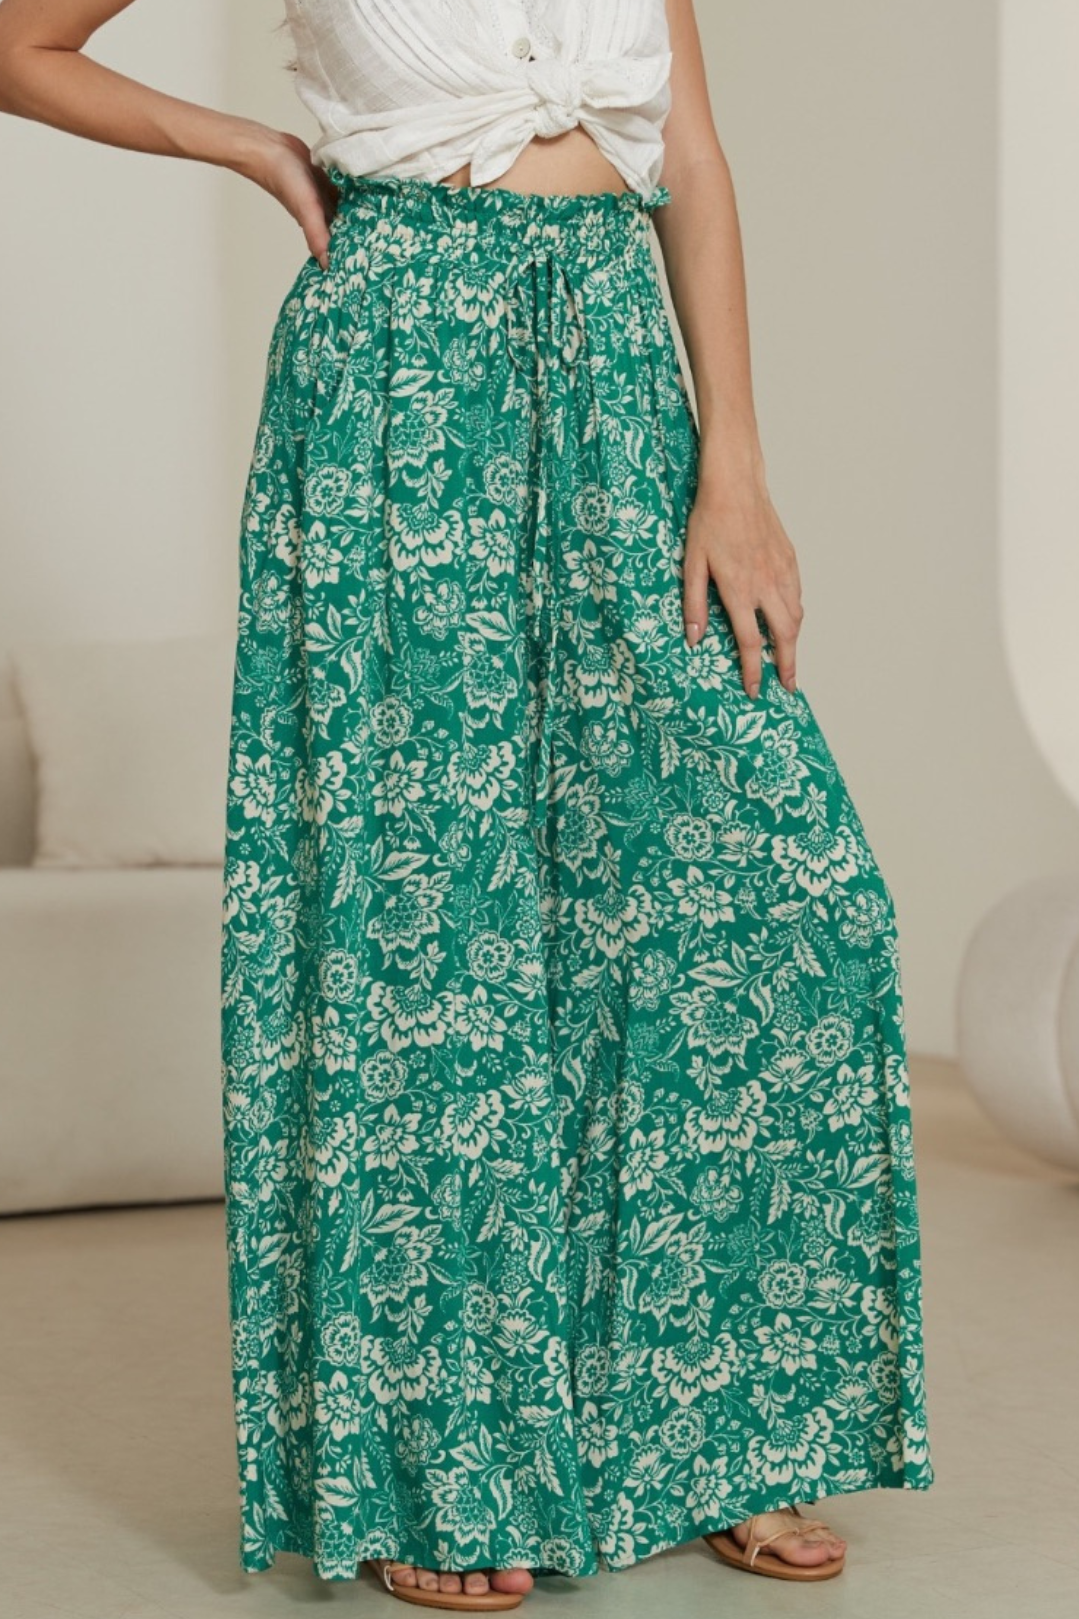 Ferne Pants - Paper Bag High Waisted Wide Leg Pants with Floral Print